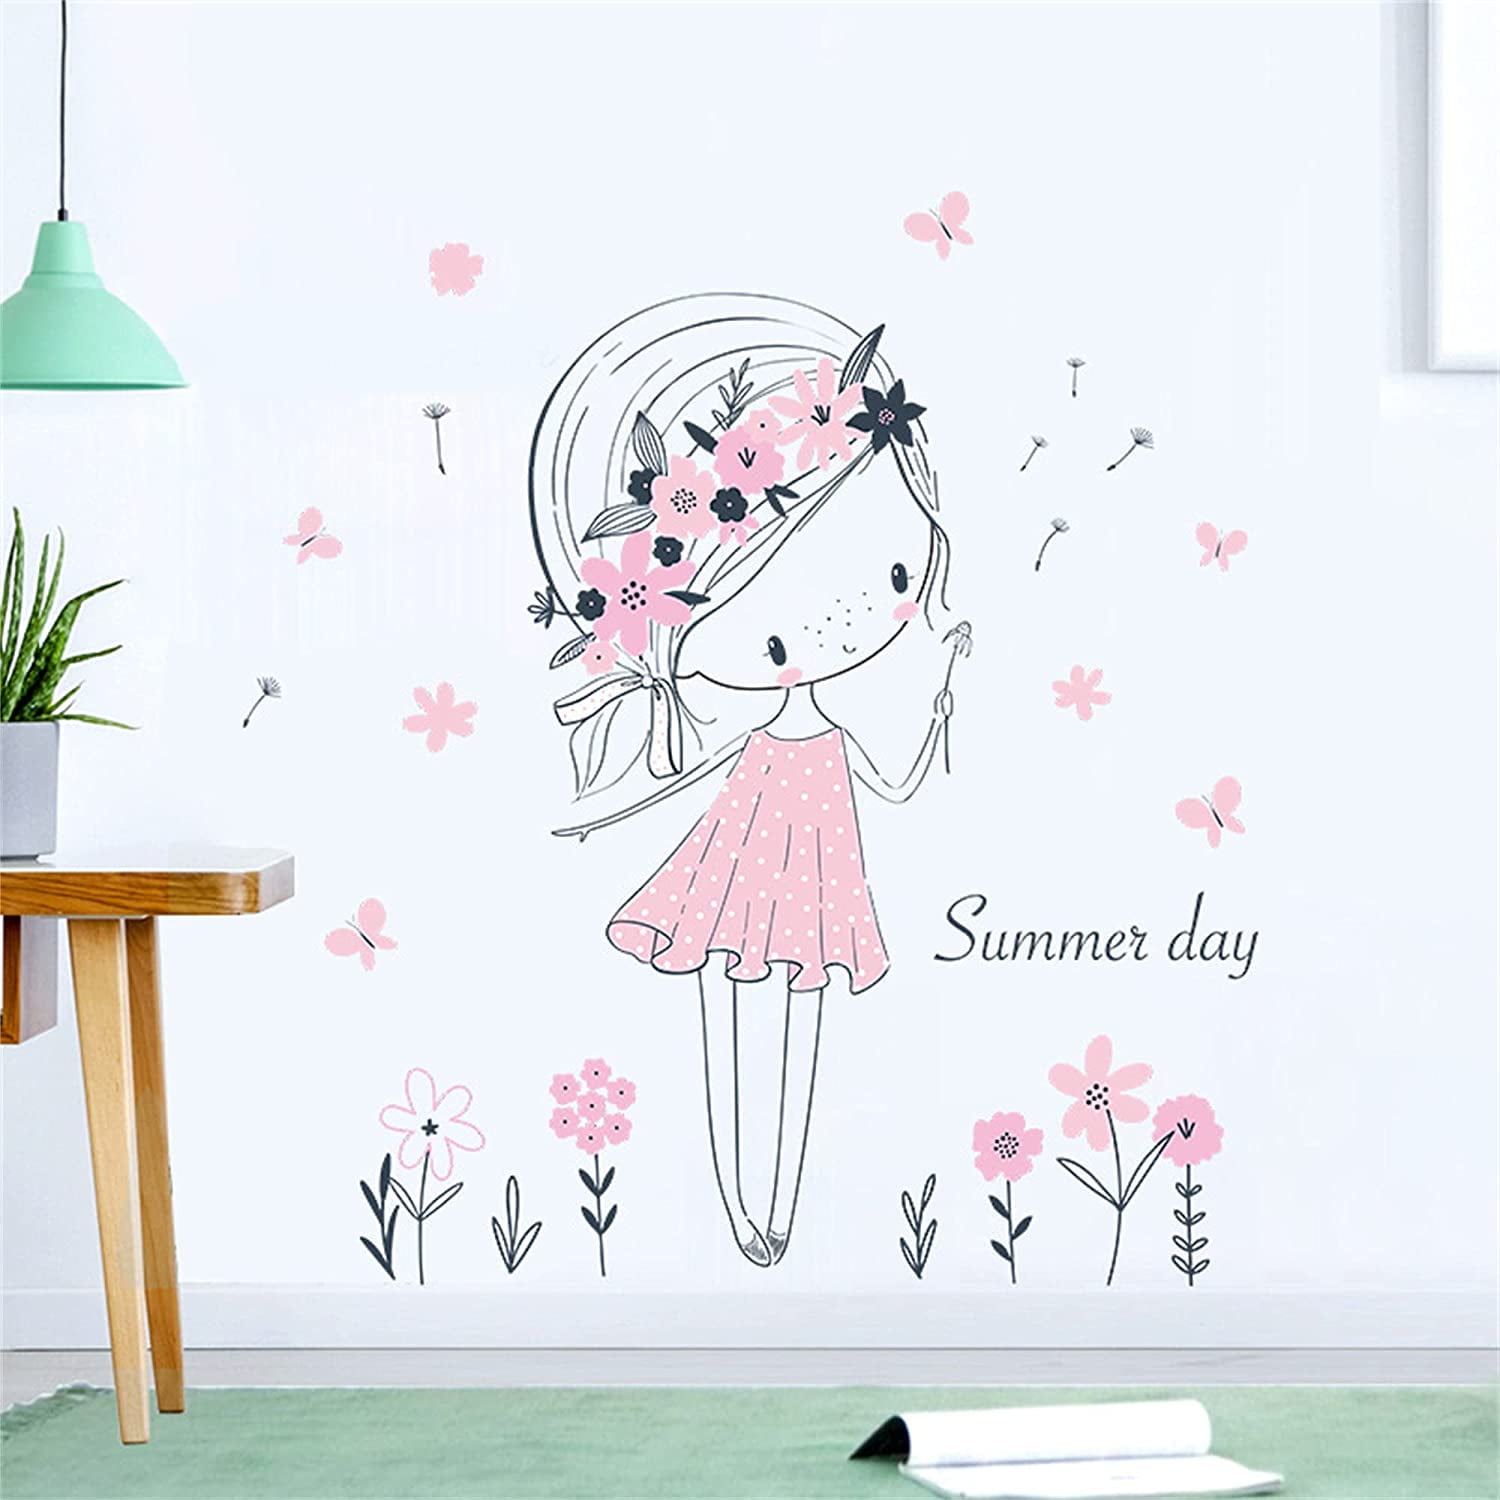 Cute Lovely Home Decor Wall Sticker Removable Living Room Bedroom Decoration